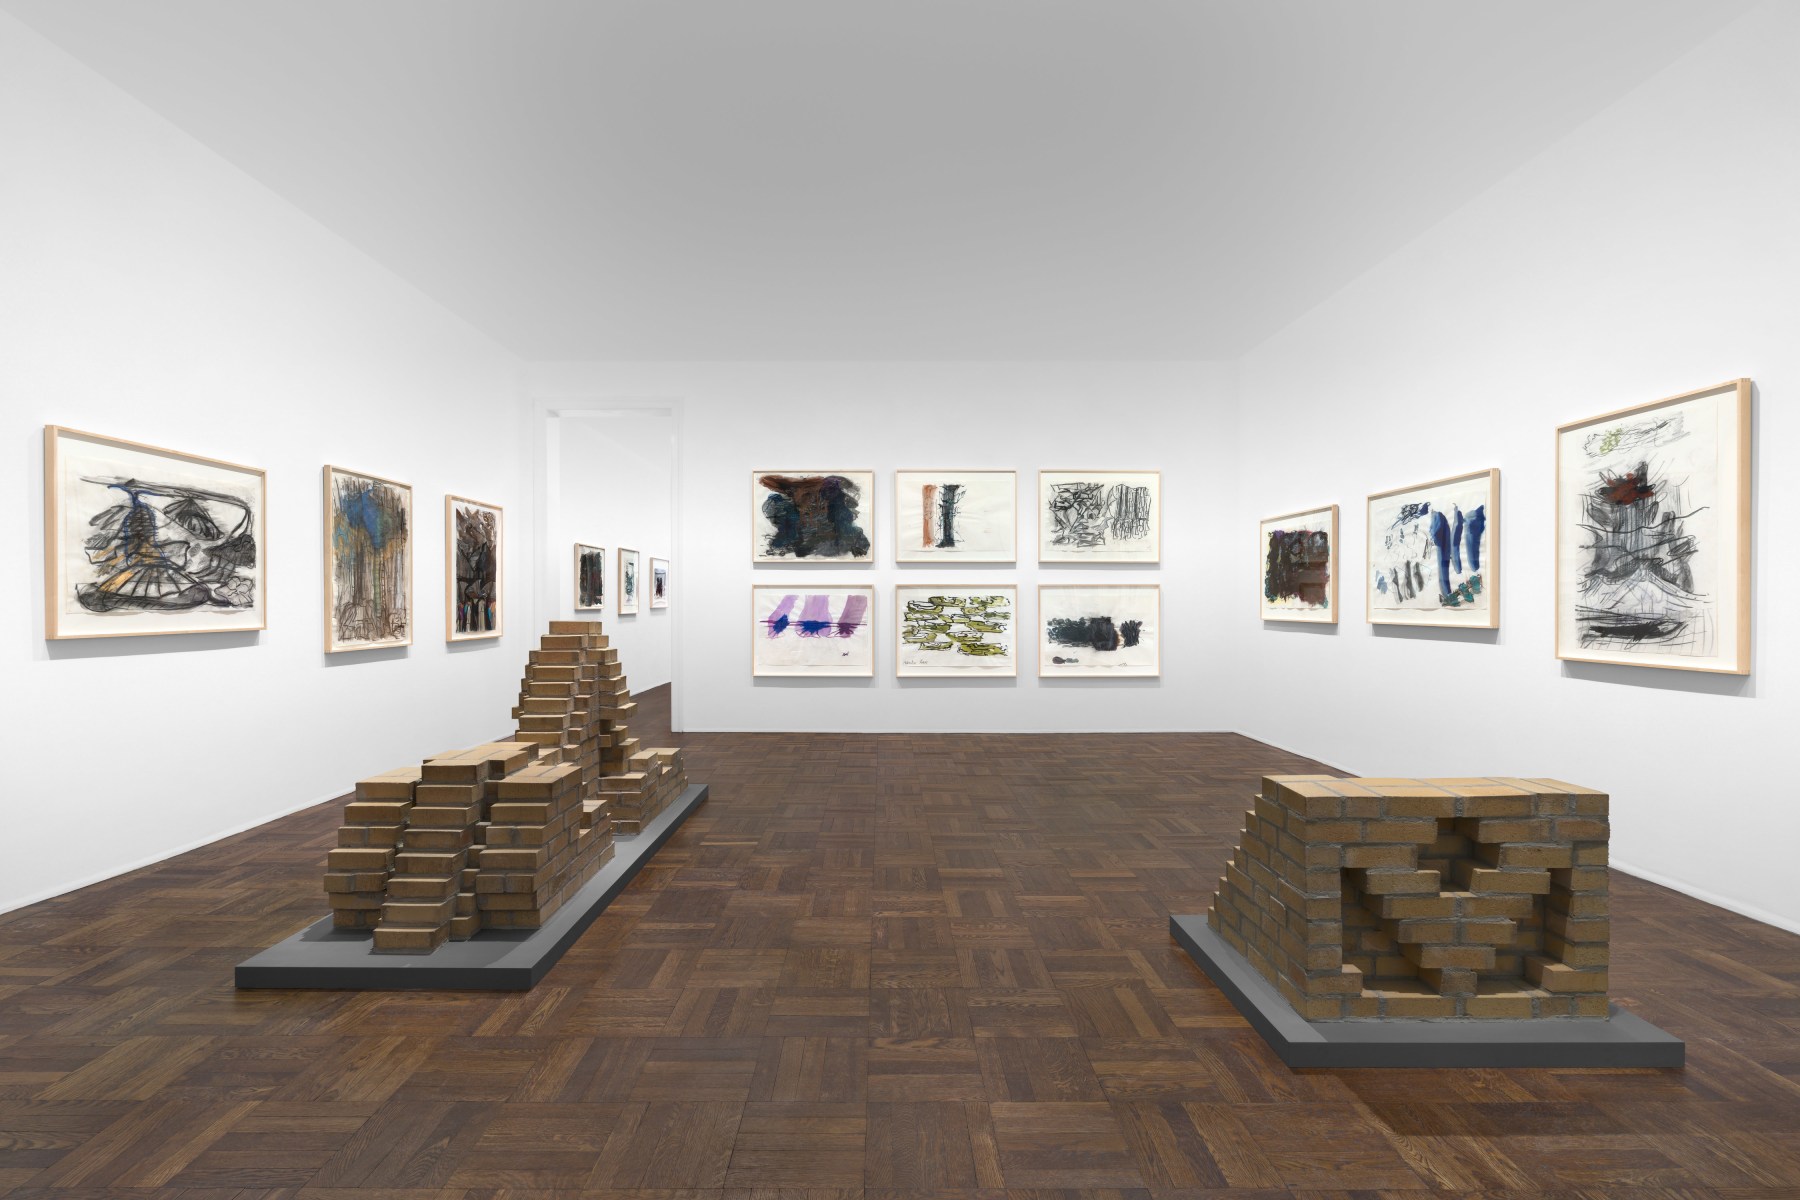 PER KIRKEBY Works on Paper, Works in Brick 20 November 2019 through 25 January 2020 UPPER EAST SIDE, NEW YORK, Installation View 6